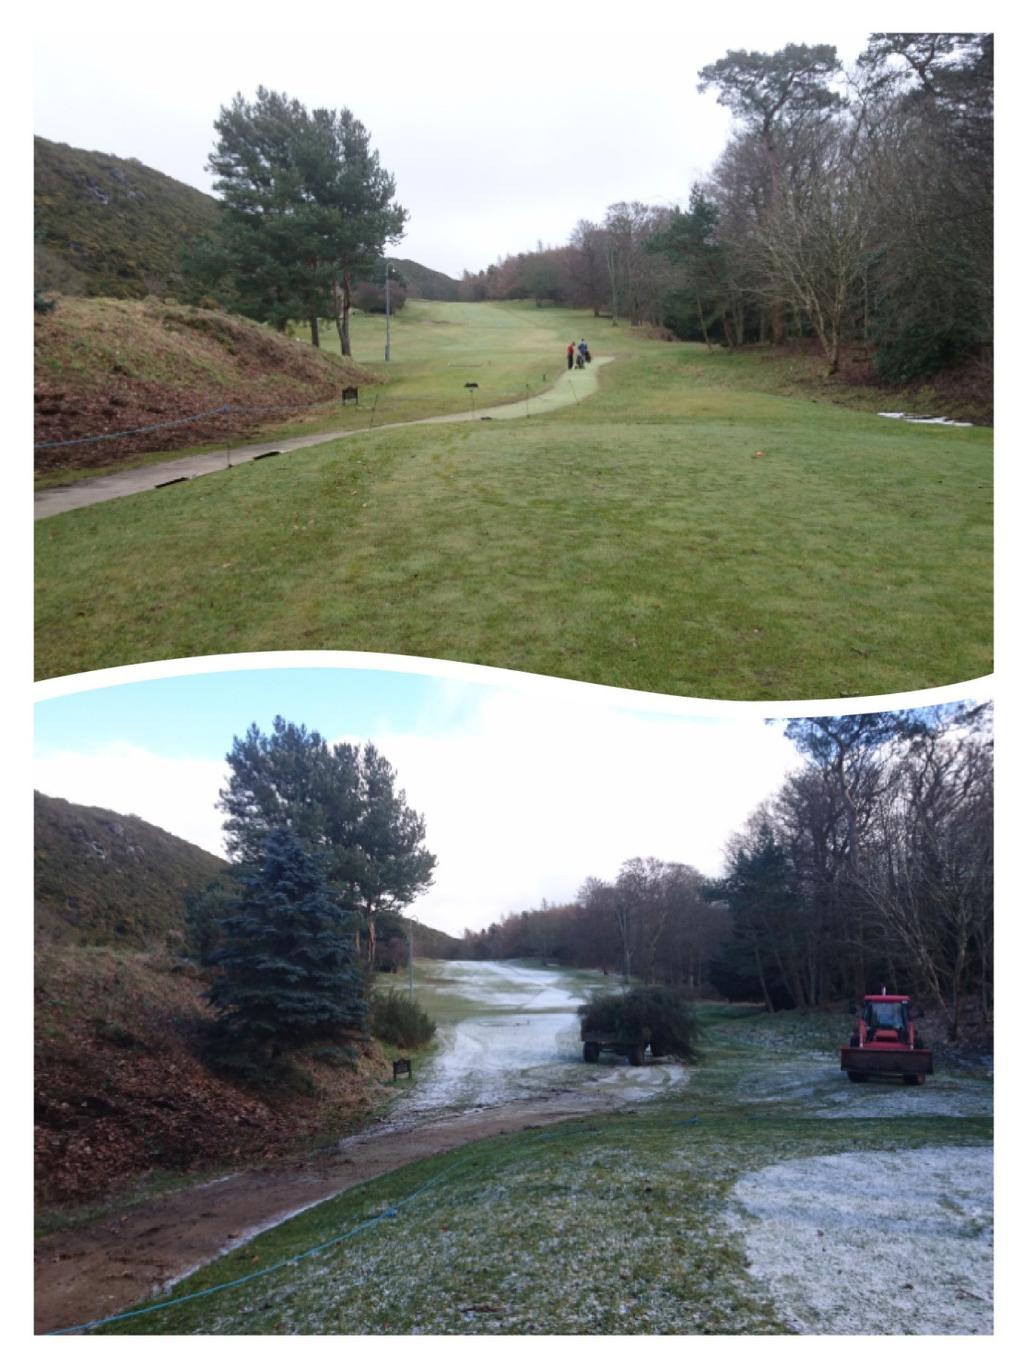 Tee Surrounds Cleared We have continued to clear unwanted growth and vegetation in compliance with our Ecological Management Plan, and have finished areas around 1 st tee and 13 th tee.